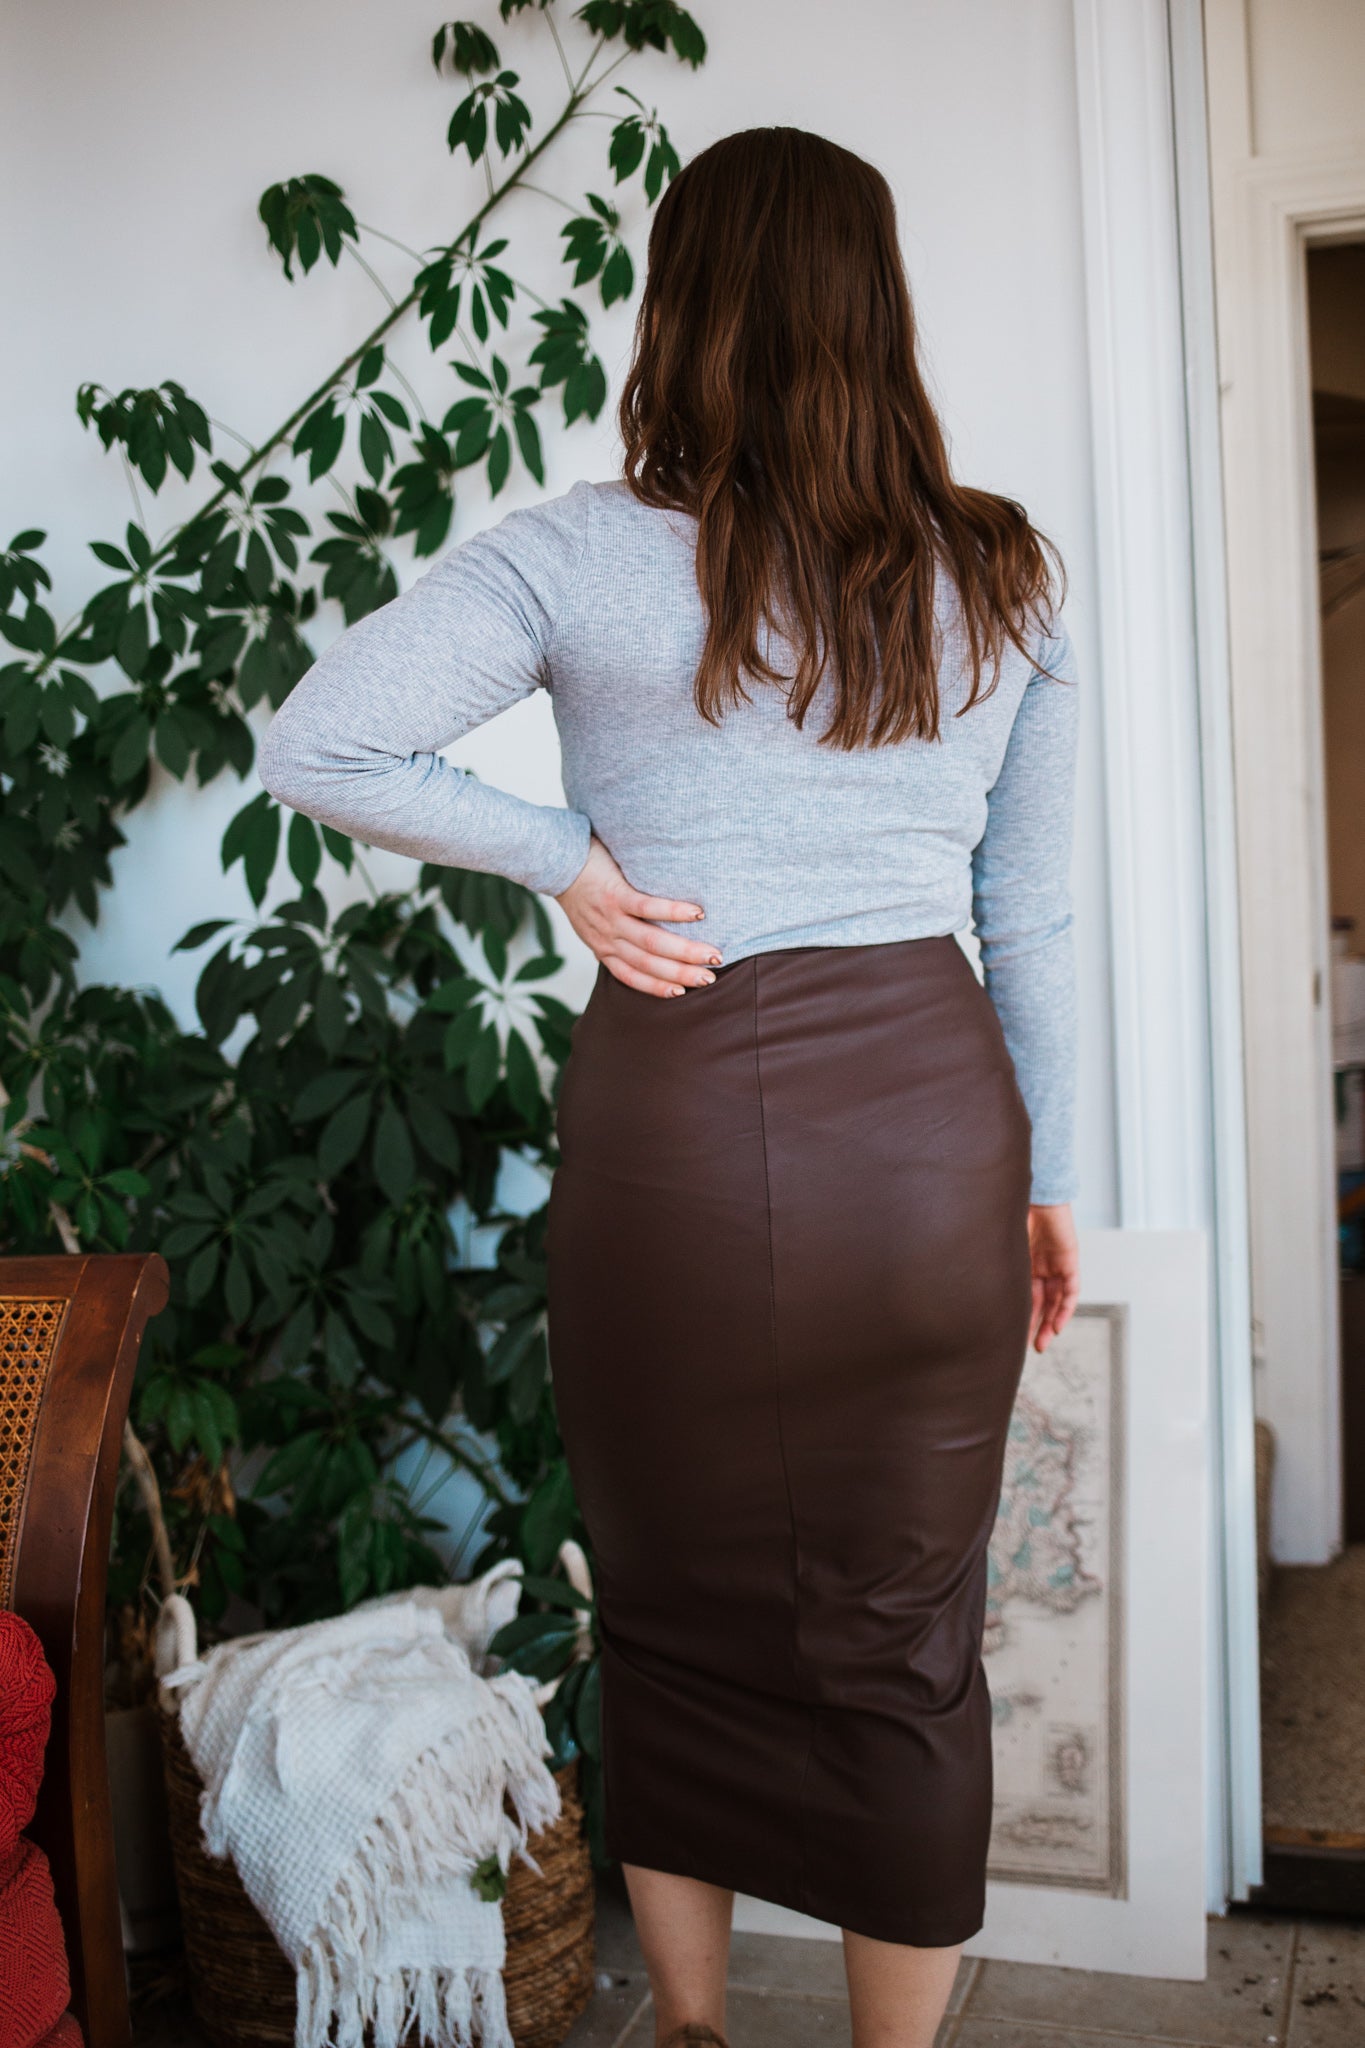 THE ZARA FAUX LEATHER SKIRT